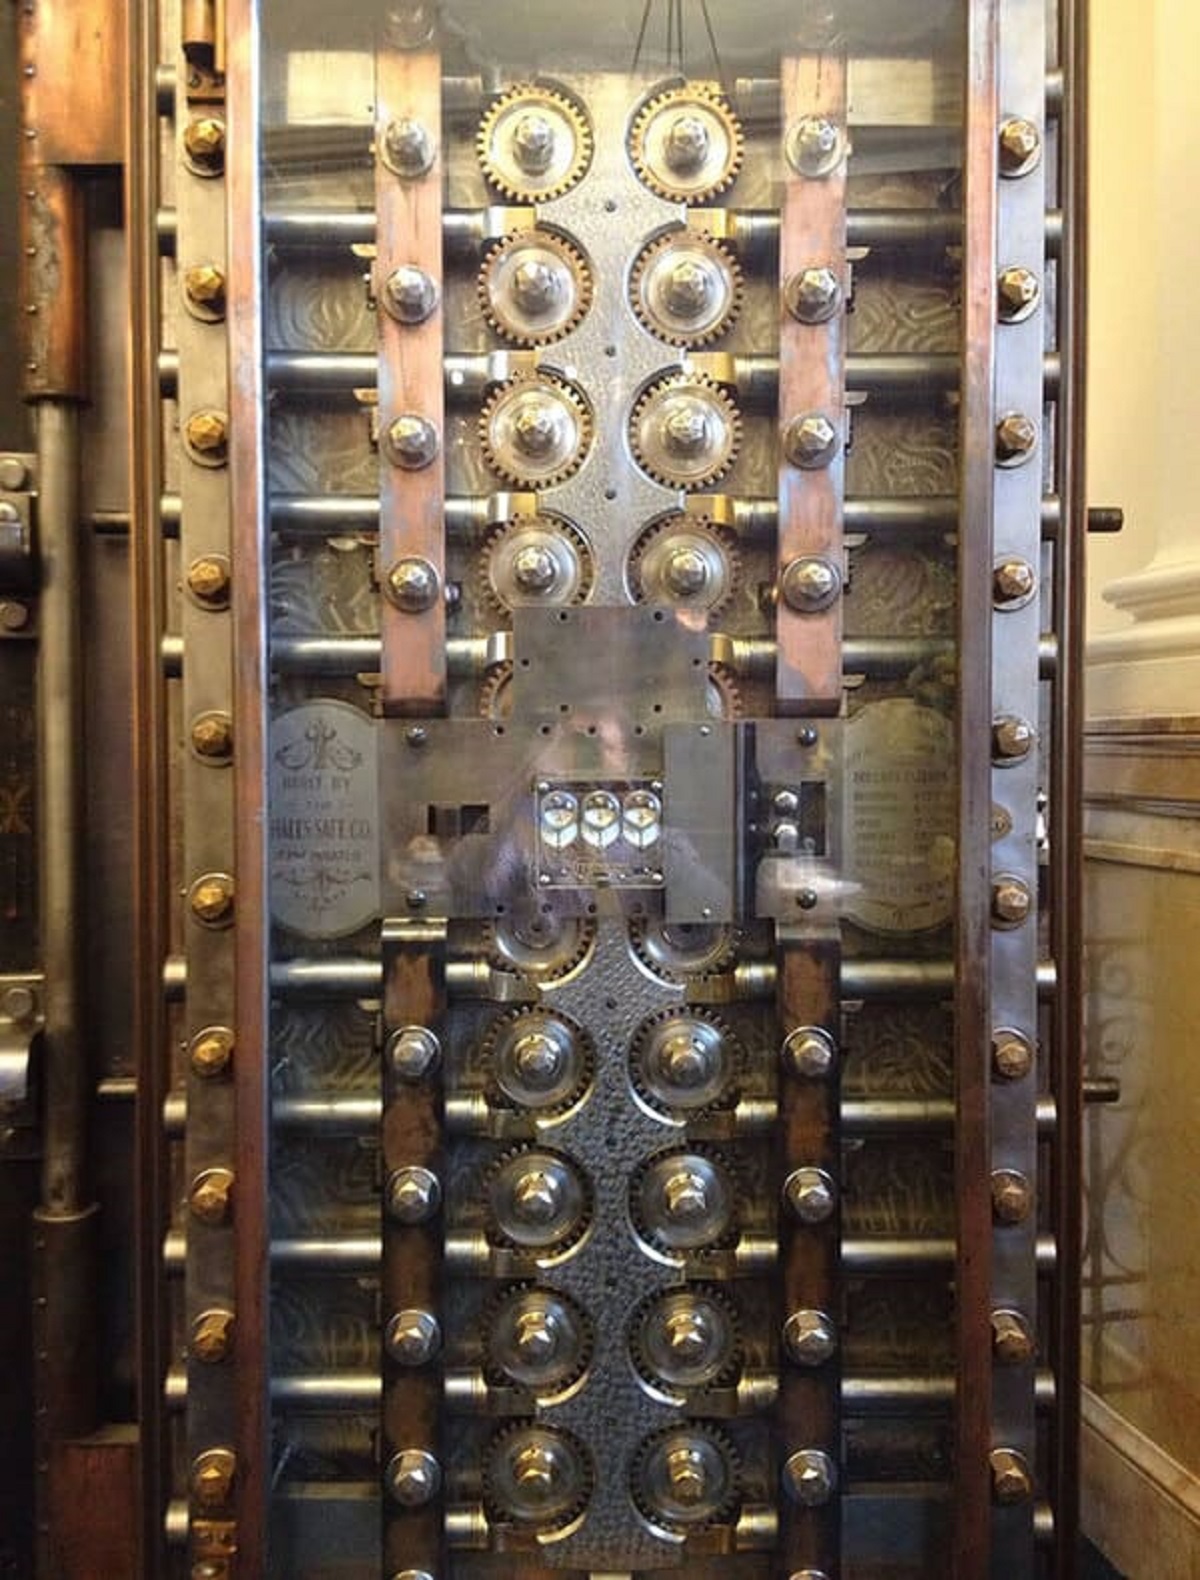 “Inside Of The Vault Door At The Bank I Work At. Beautiful Engineering From 1800s”